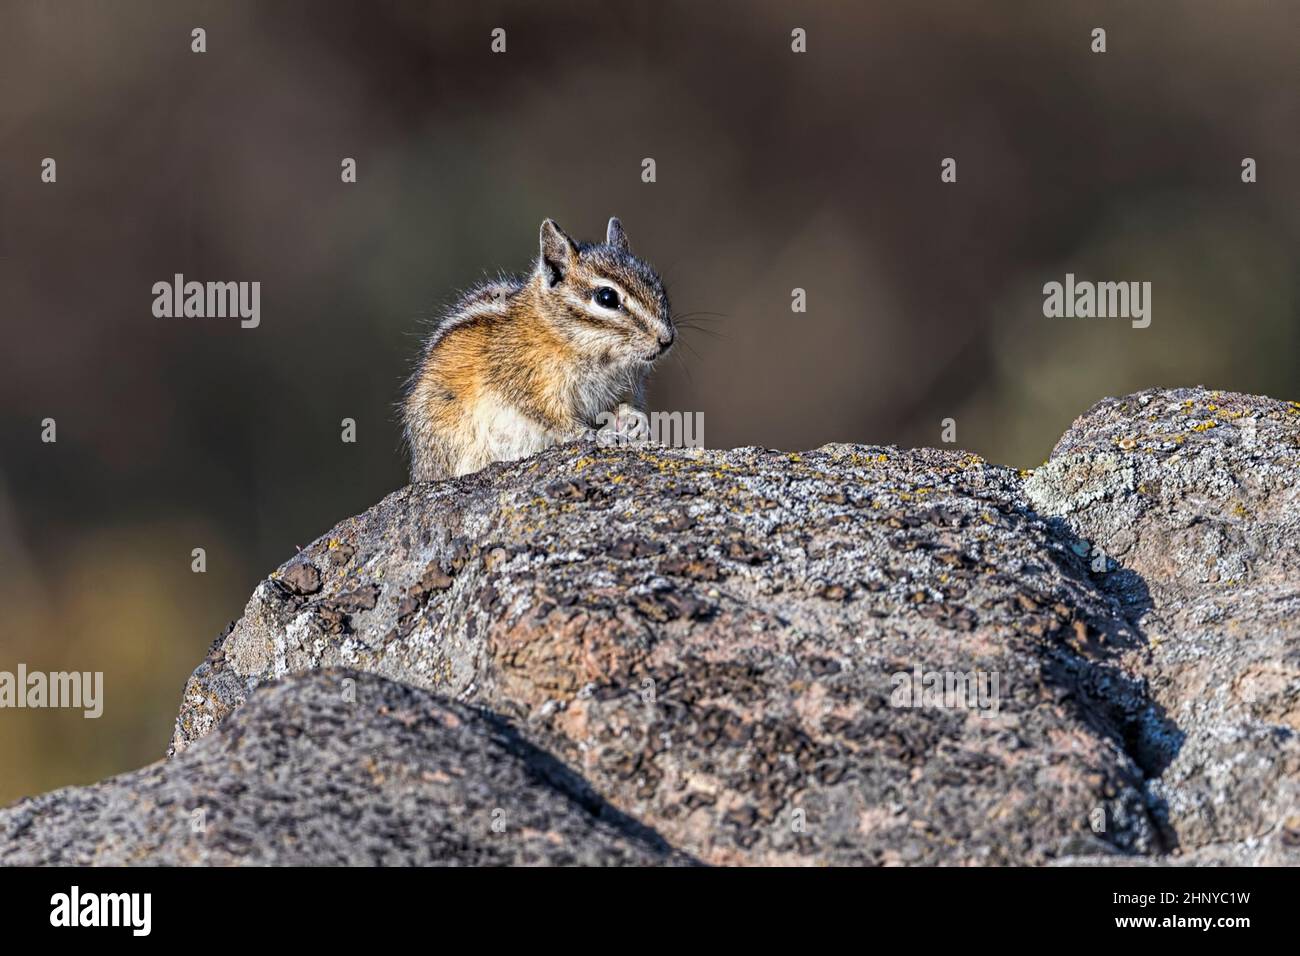 A small chipmunk is perched on a rock at Turnbull Wildlife Refuge near Cheney, Washington. Stock Photo